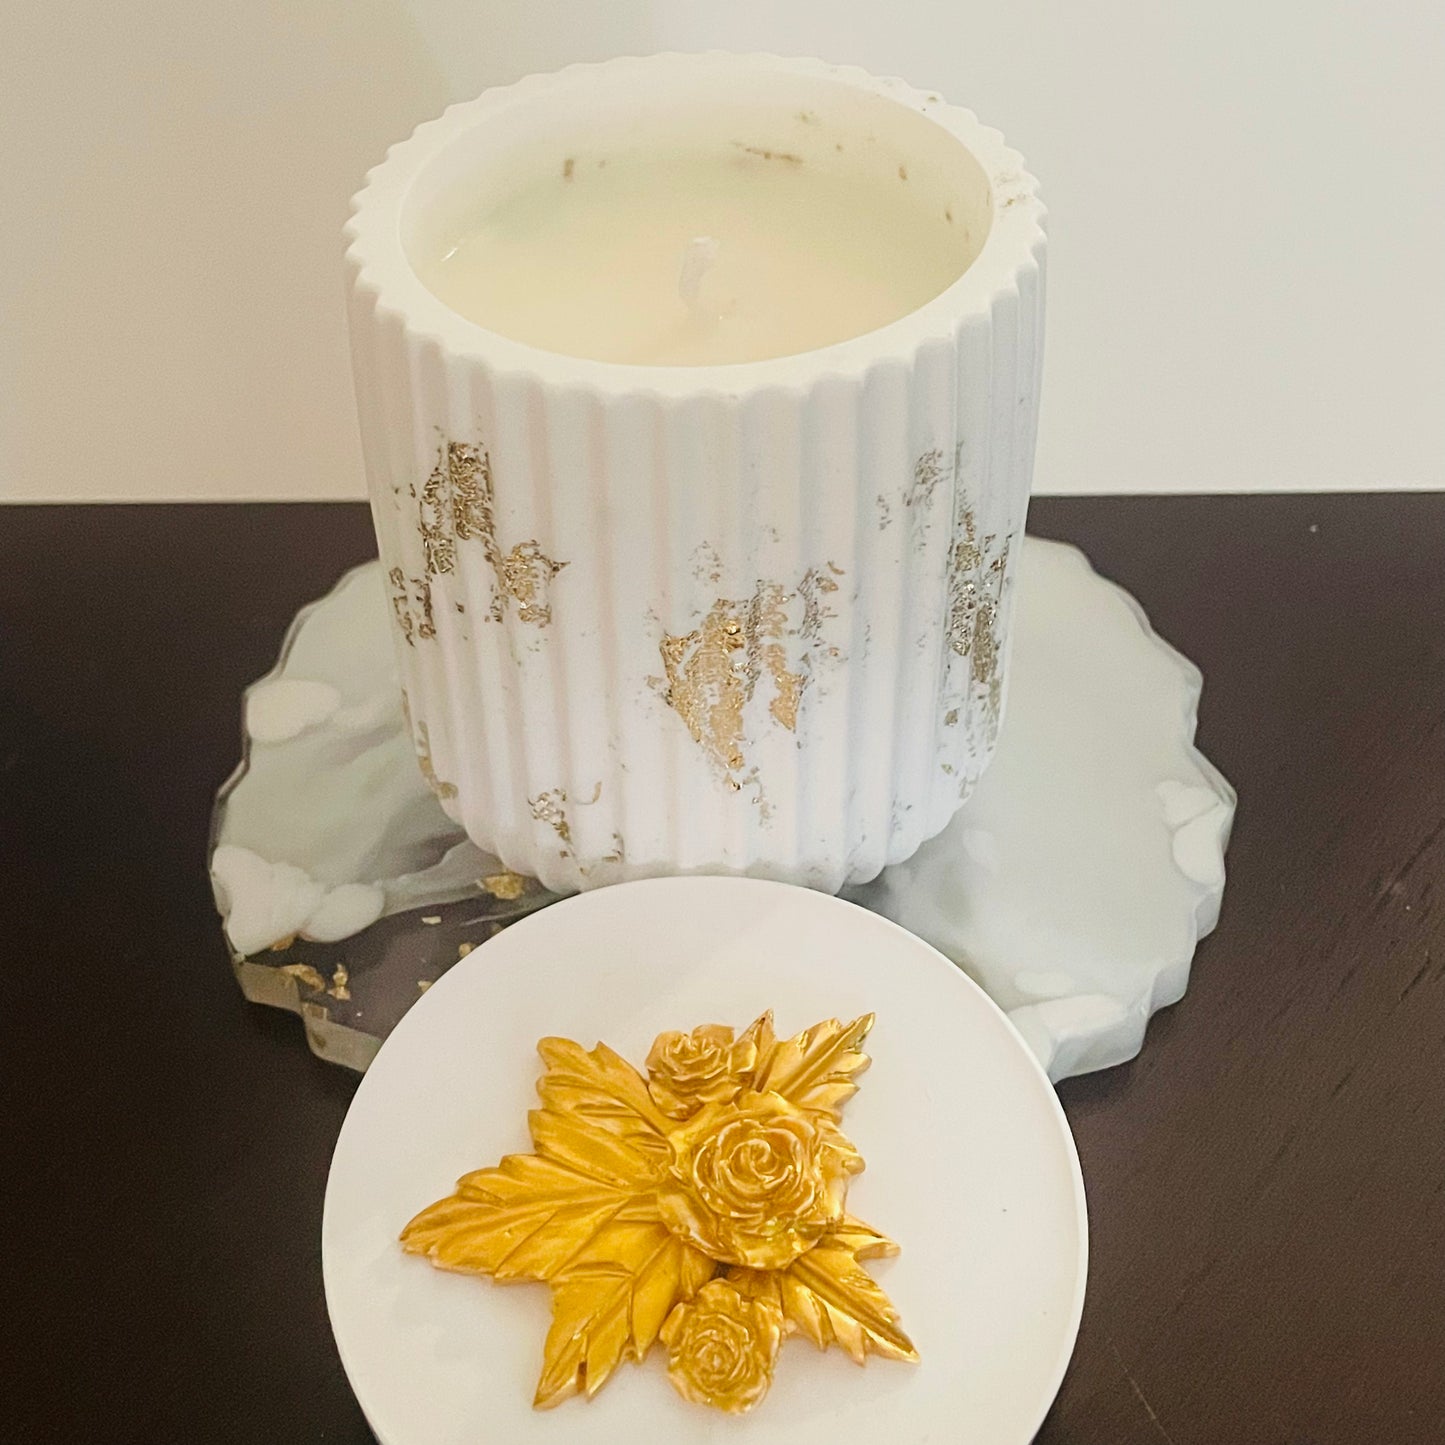 Echo-Resin Jar with Candle